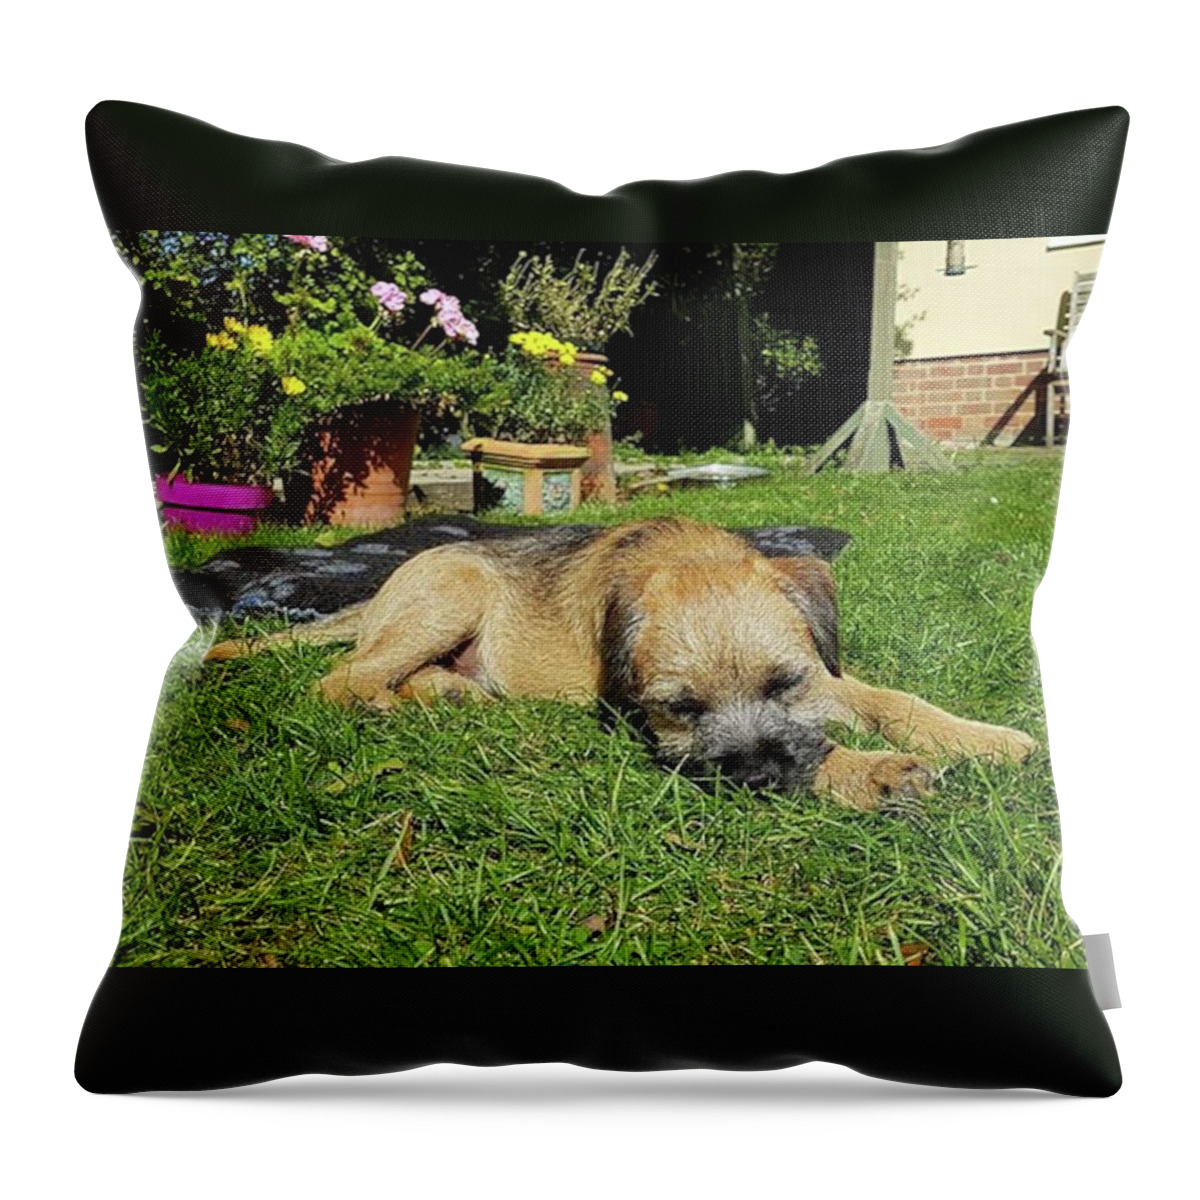 Dog Throw Pillow featuring the photograph Garden Naps by Rowena Tutty